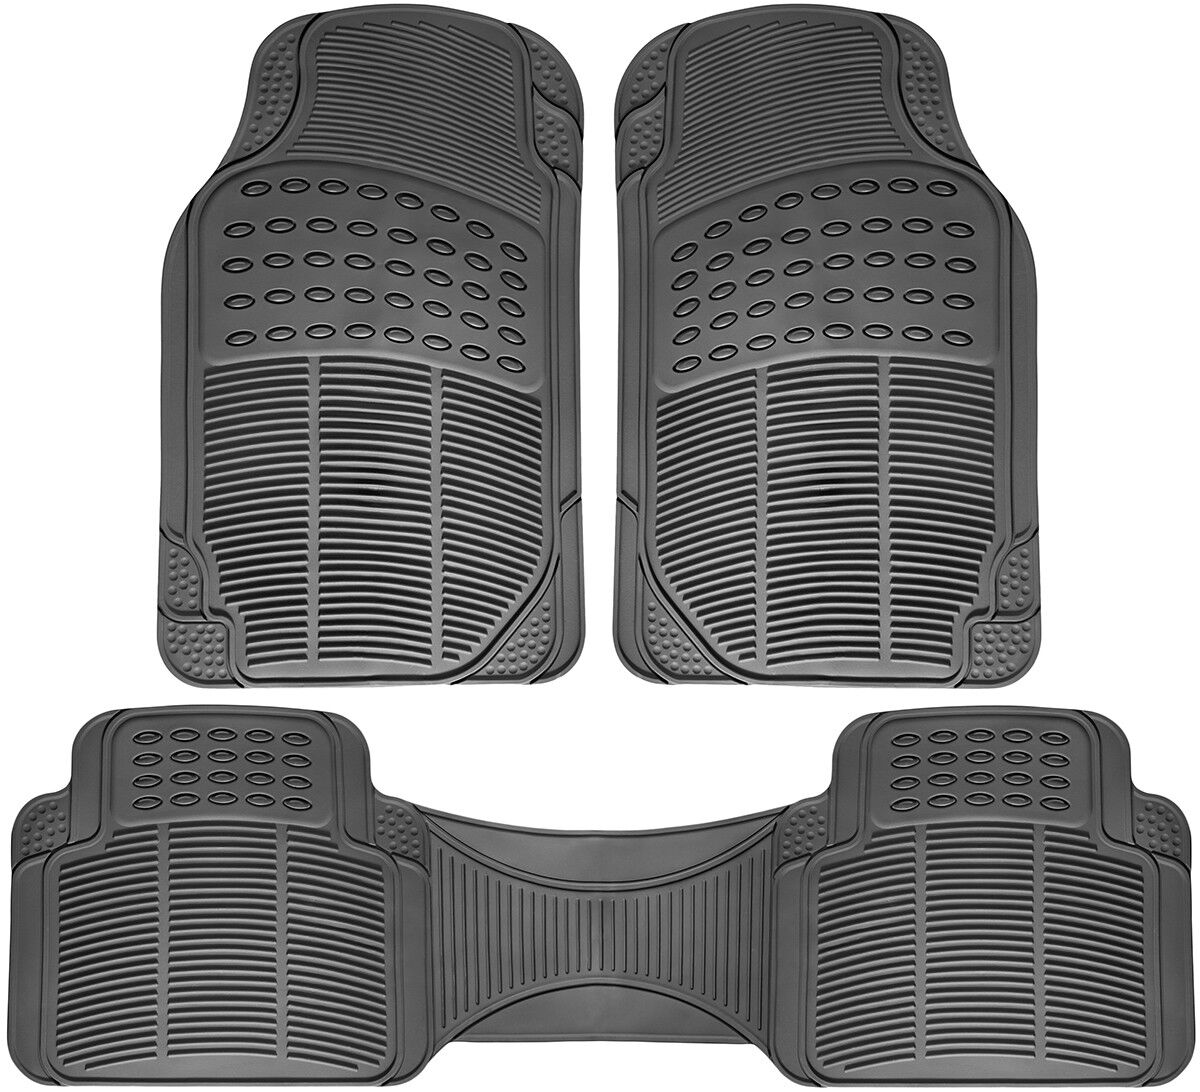 Car Floor Mats for Toyota Camry 3pc Set All Weather Rubber Semi Custom Fit Grey